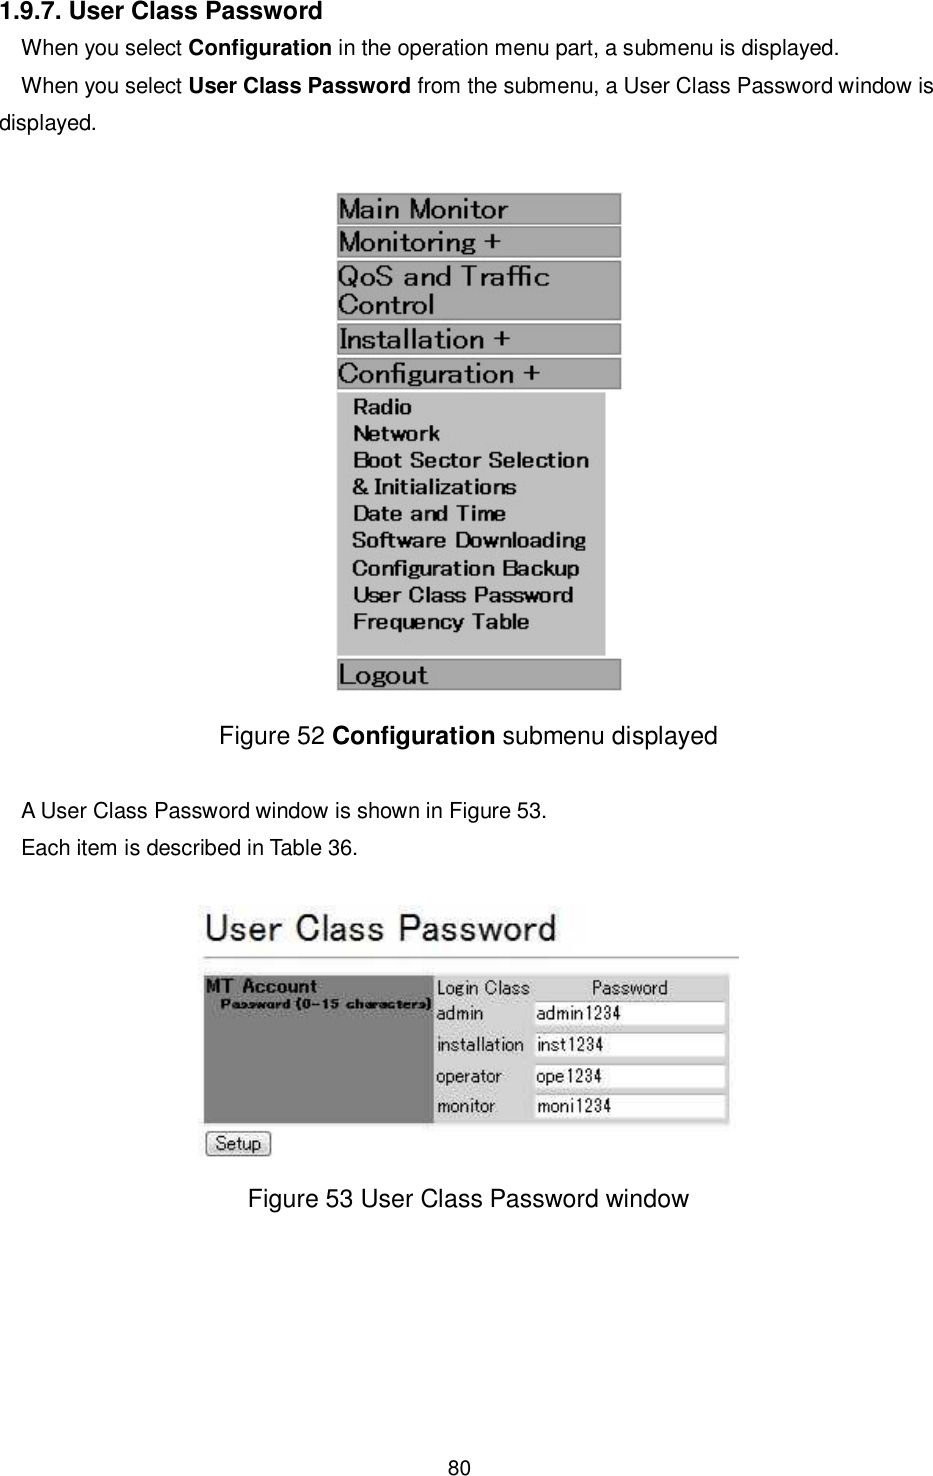    80  1.9.7. User Class Password When you select Configuration in the operation menu part, a submenu is displayed. When you select User Class Password from the submenu, a User Class Password window is displayed.   Figure 52 Configuration submenu displayed  A User Class Password window is shown in Figure 53. Each item is described in Table 36.   Figure 53 User Class Password window 